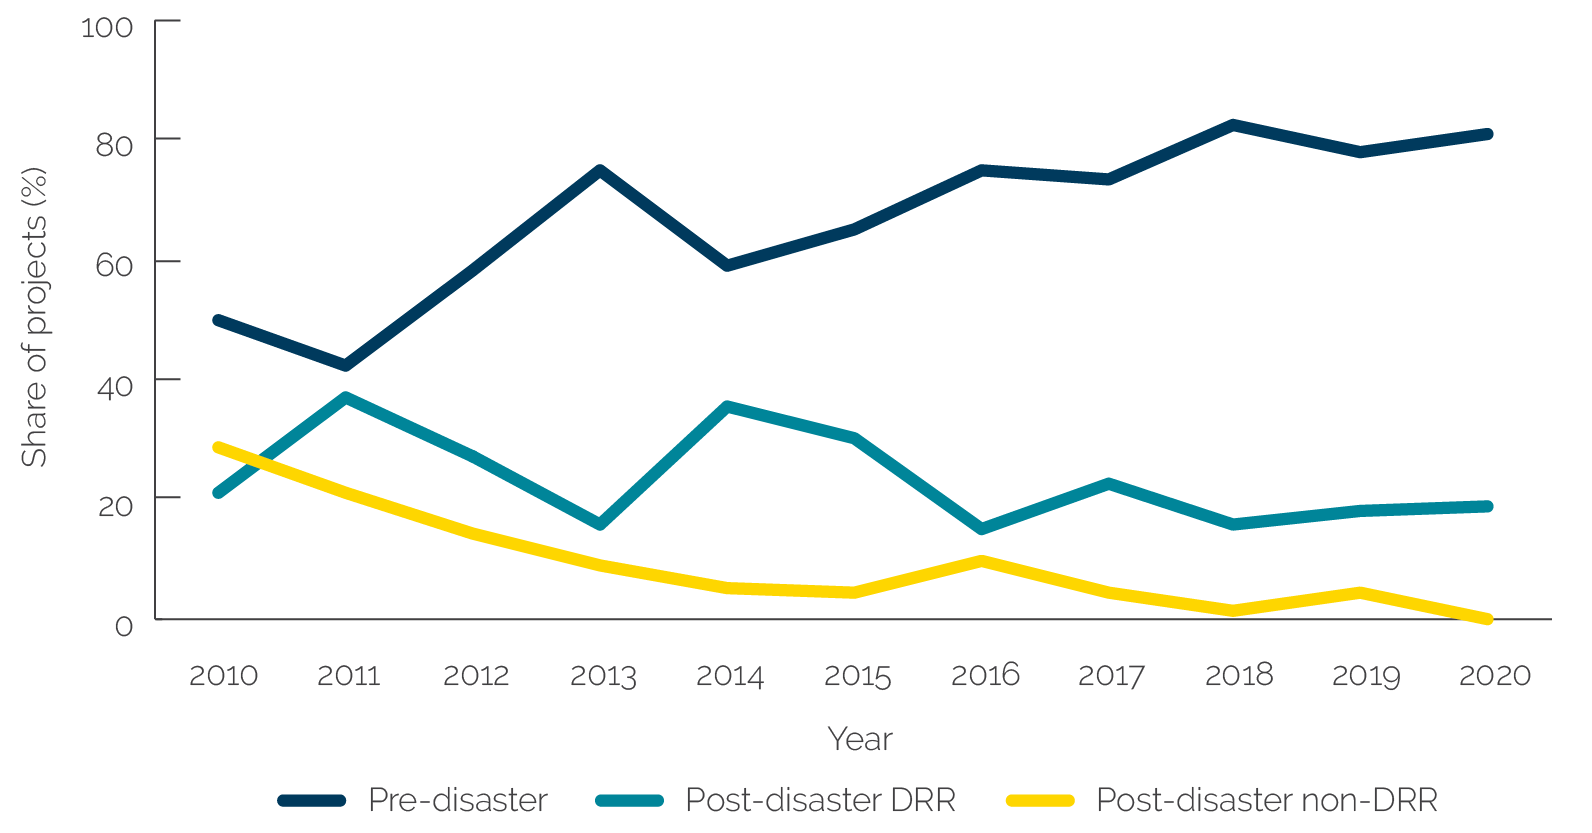 A line graph shows that the share of projects that are predisaster rose from 2010 to 2020, while the share of post-disaster projects with no D R R has fallen to almost zero.